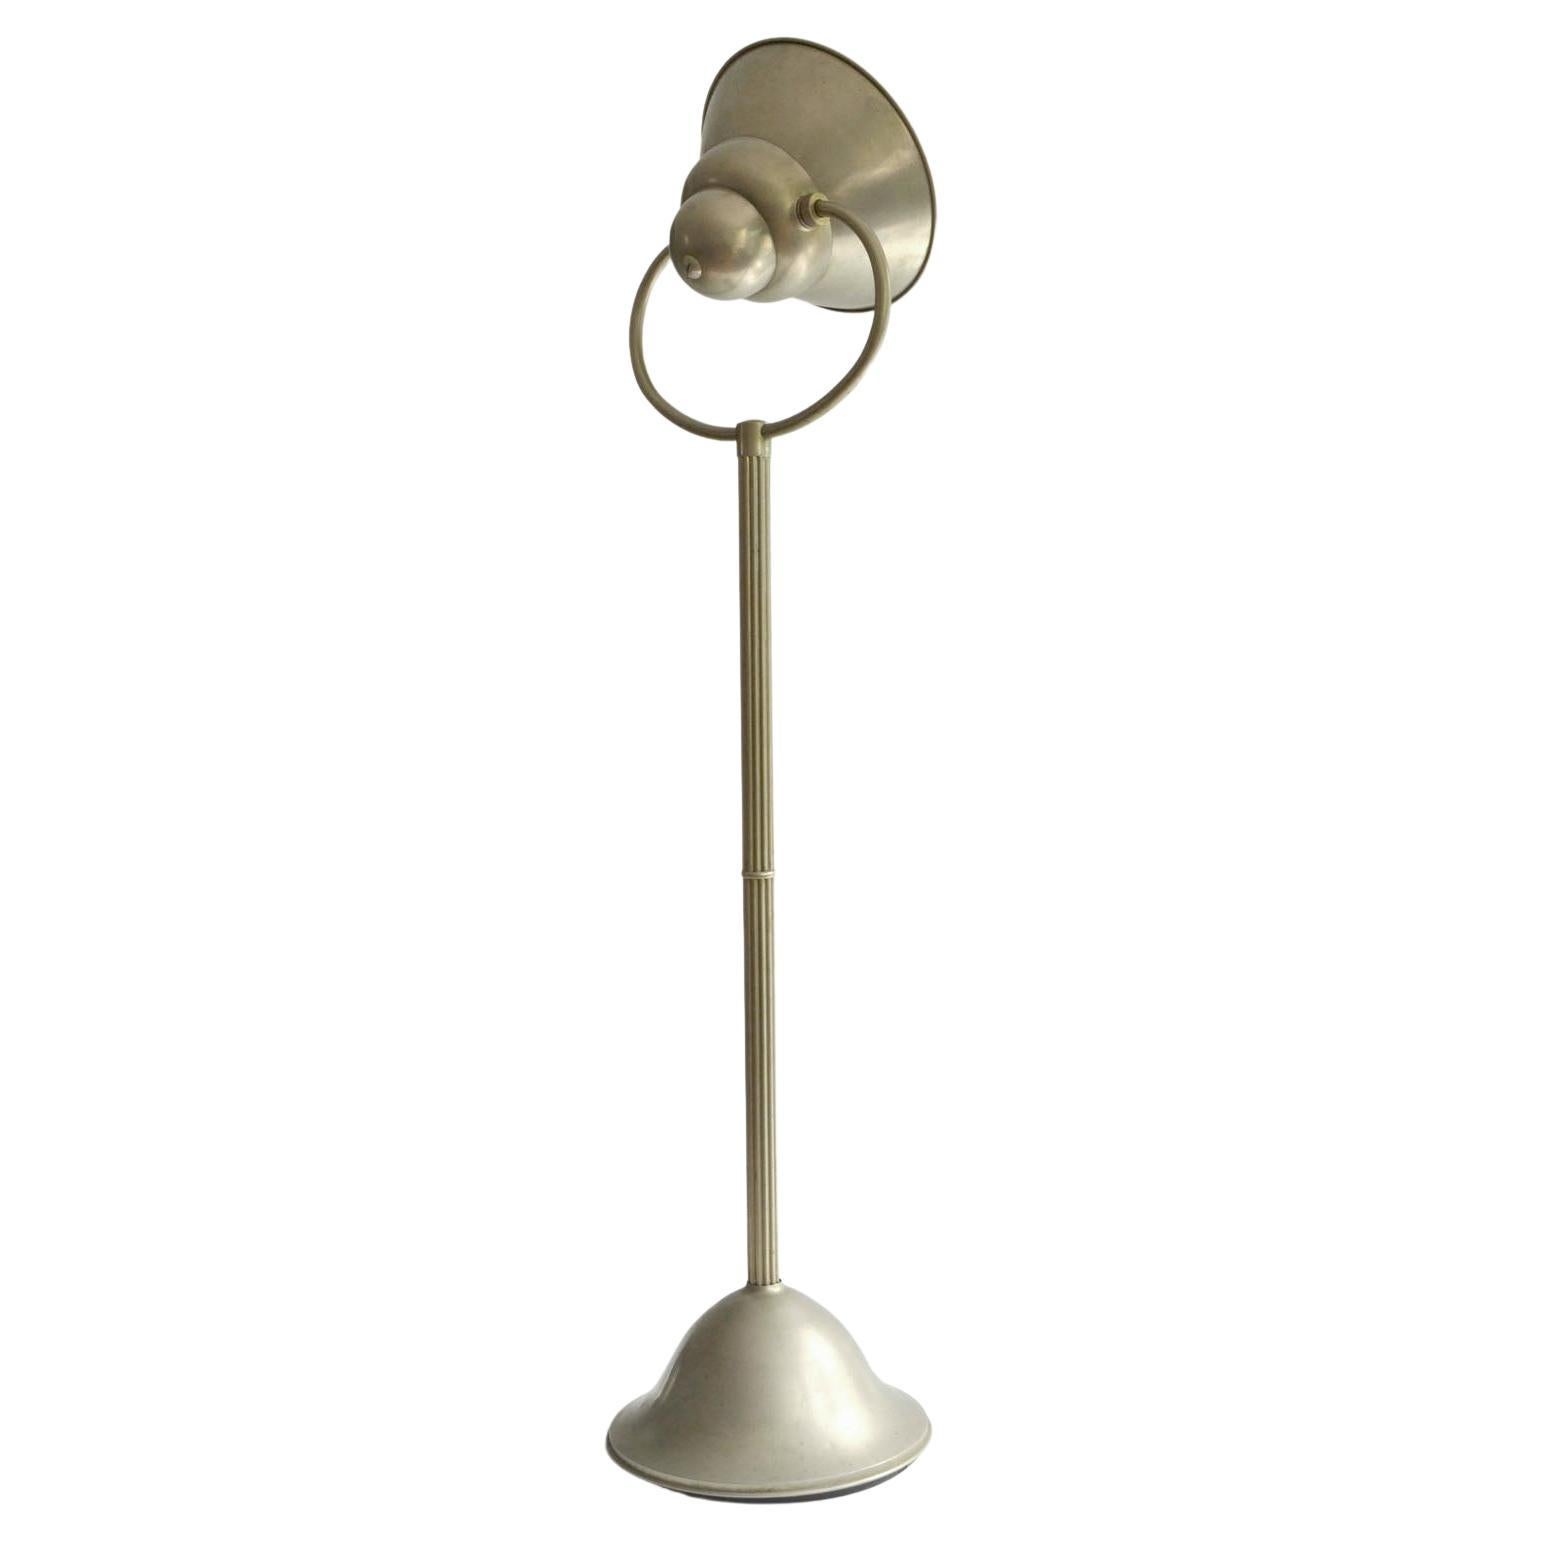 Modernist Art Deco floor lamp with adjustable shade to direct the light up, down or side ways. Functionalist design has a has a reflector finished shade to optimize the light and create indirect way of lighting . This rare and innovative design is